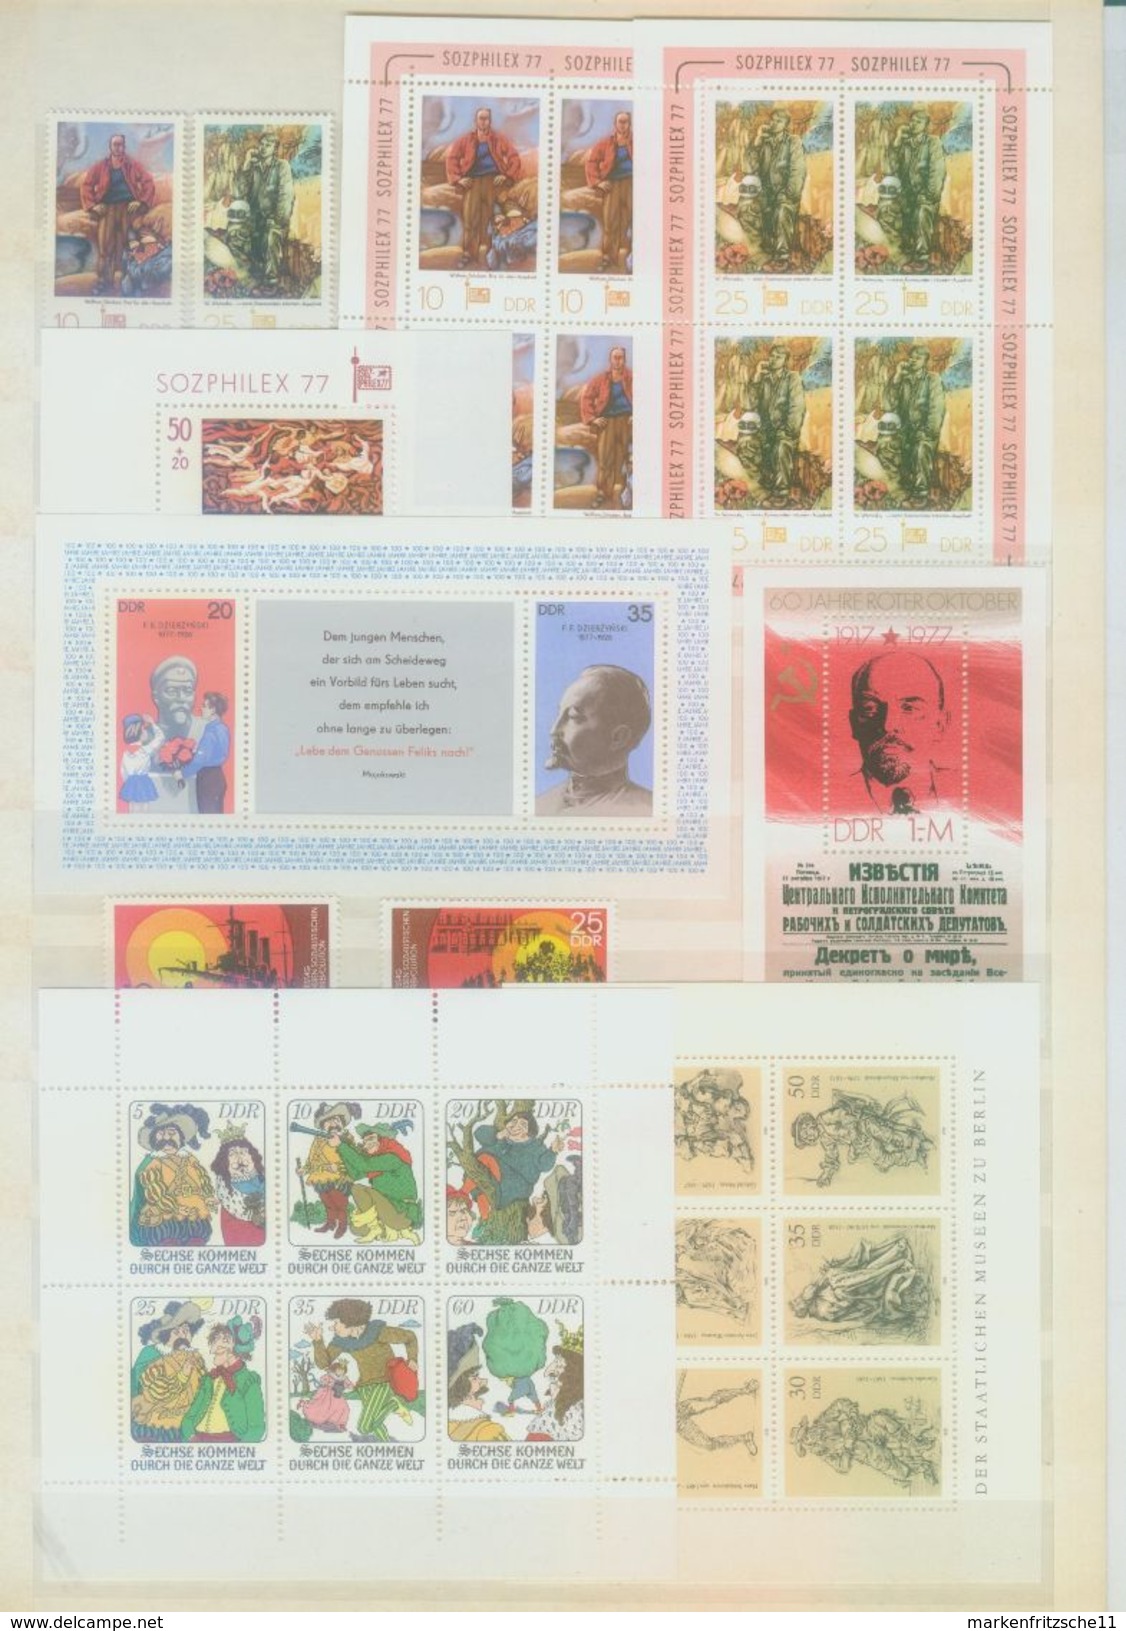 Lot ältere DDR (Ost Germany)  ** - Lots & Kiloware (mixtures) - Max. 999 Stamps